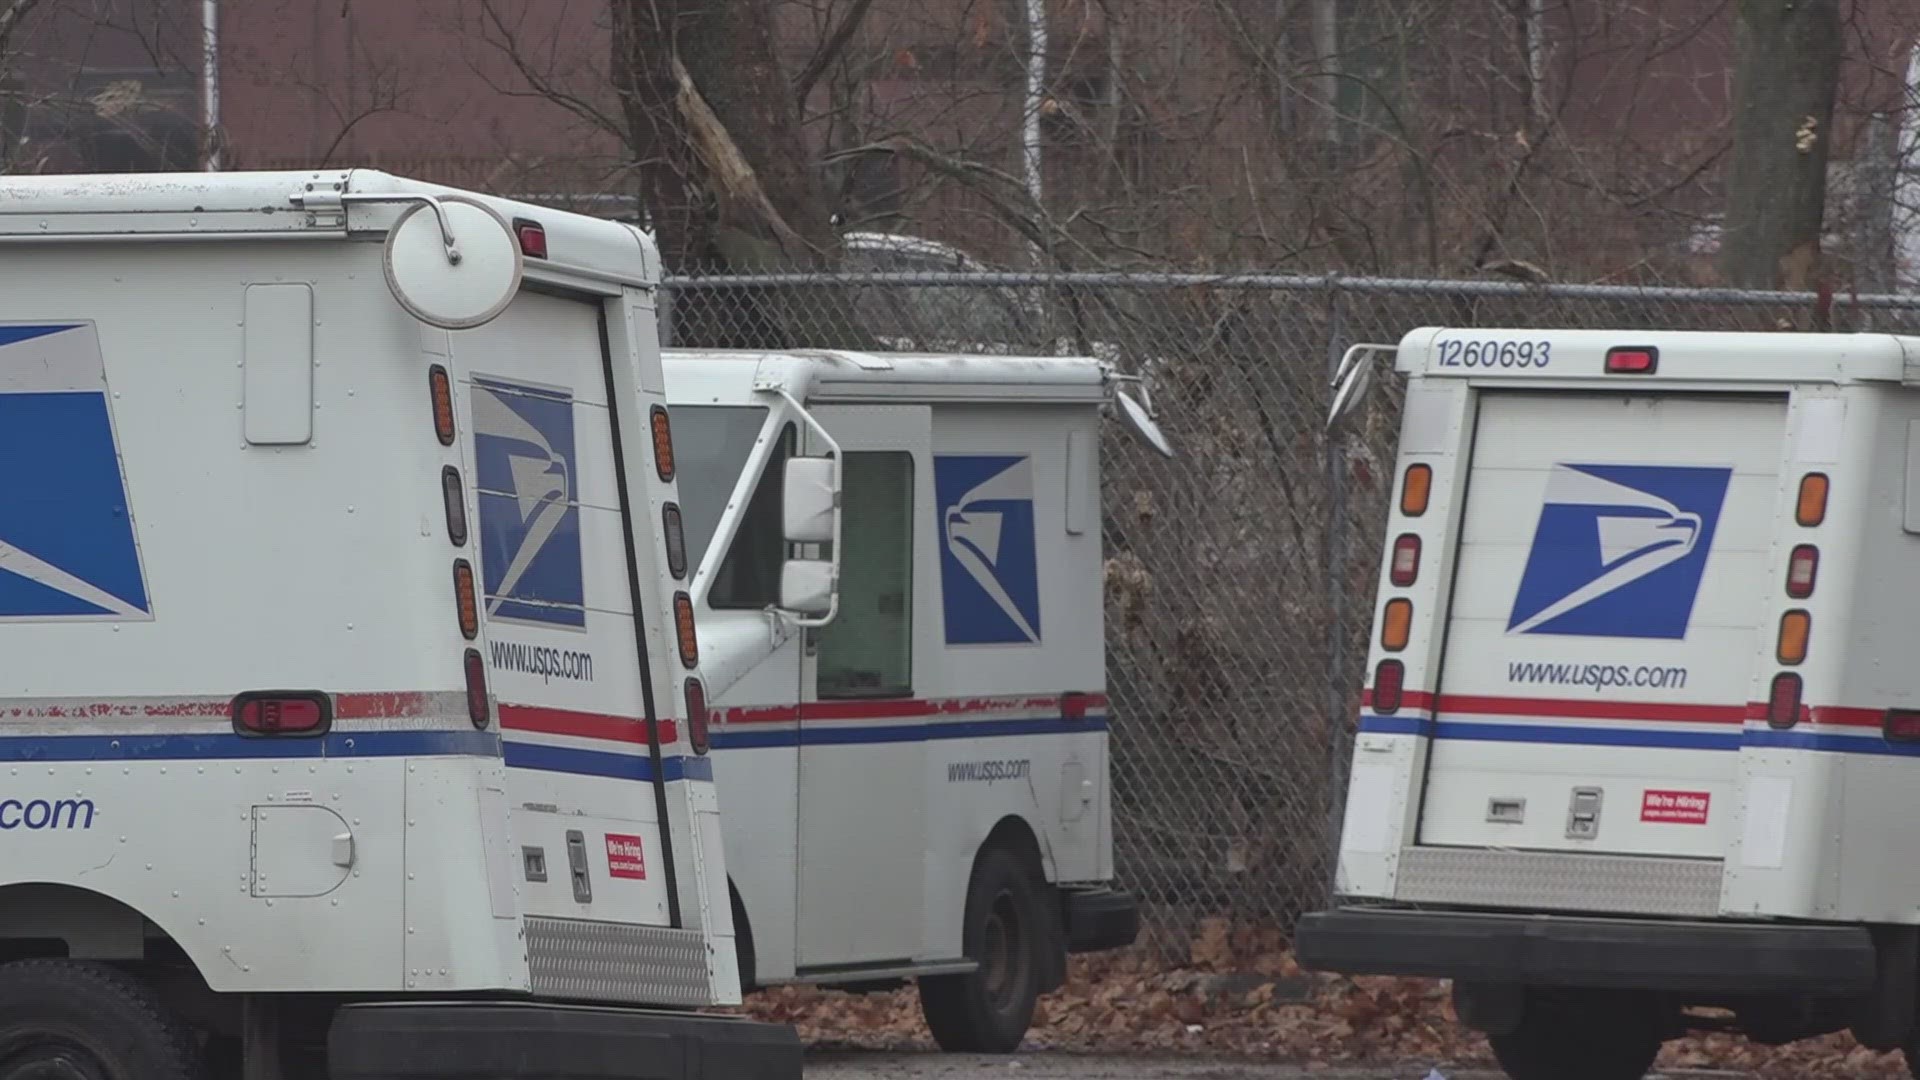 The delay has impacted families and USPS business.